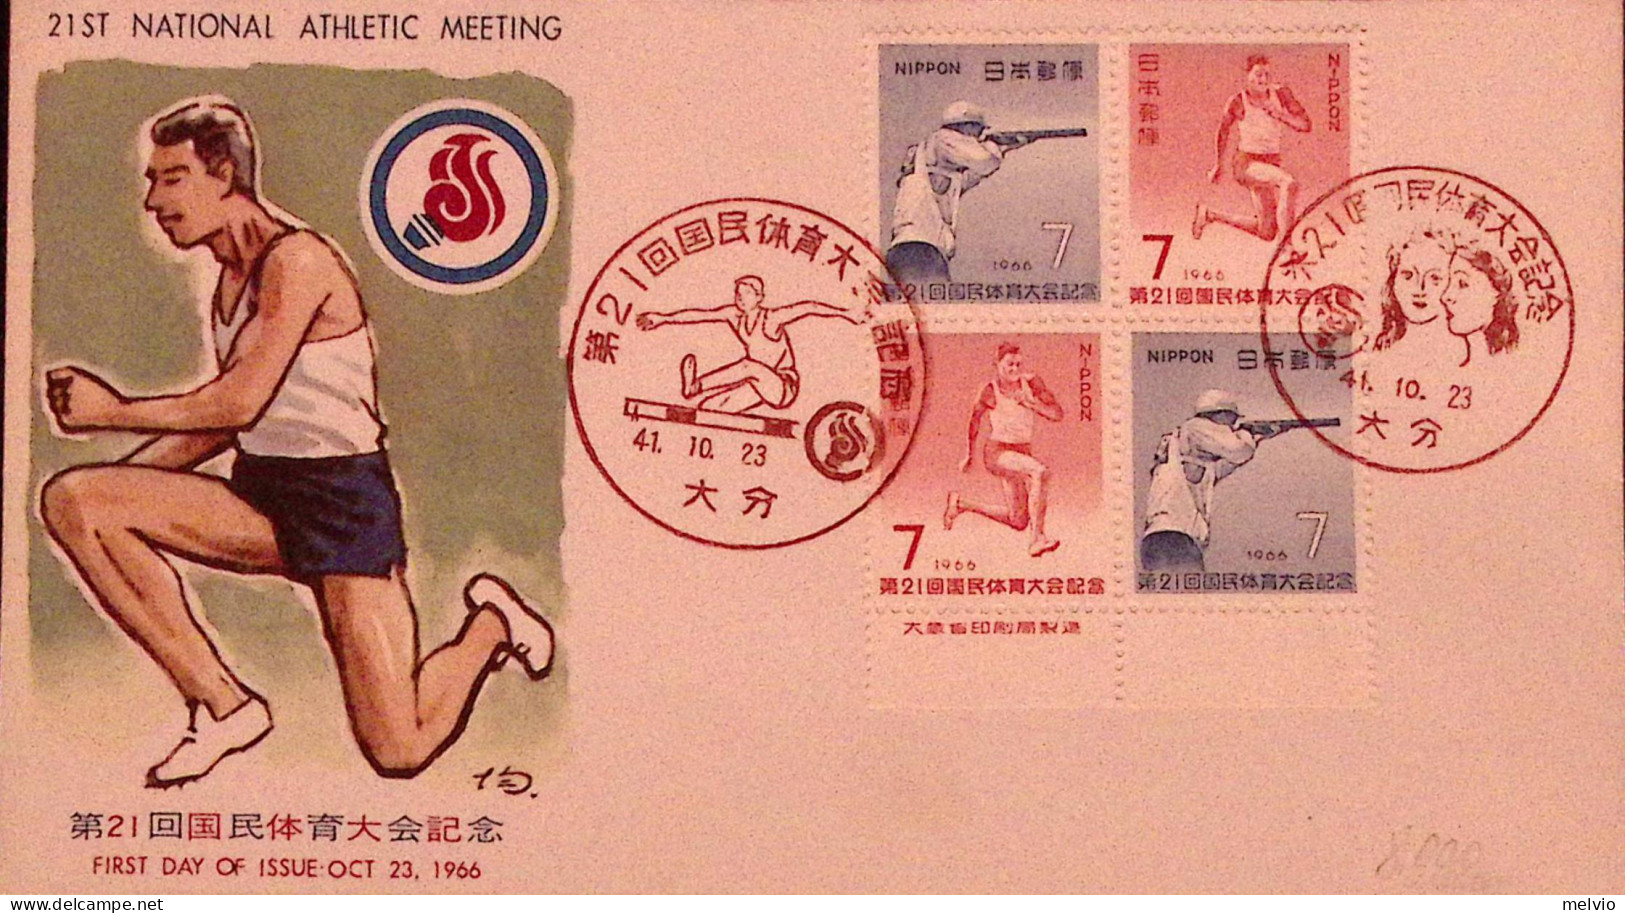 1966-Giappone NIPPON 21 Meeting Naz. Atletica Serie Cpl. (852/3) Fdc - FDC